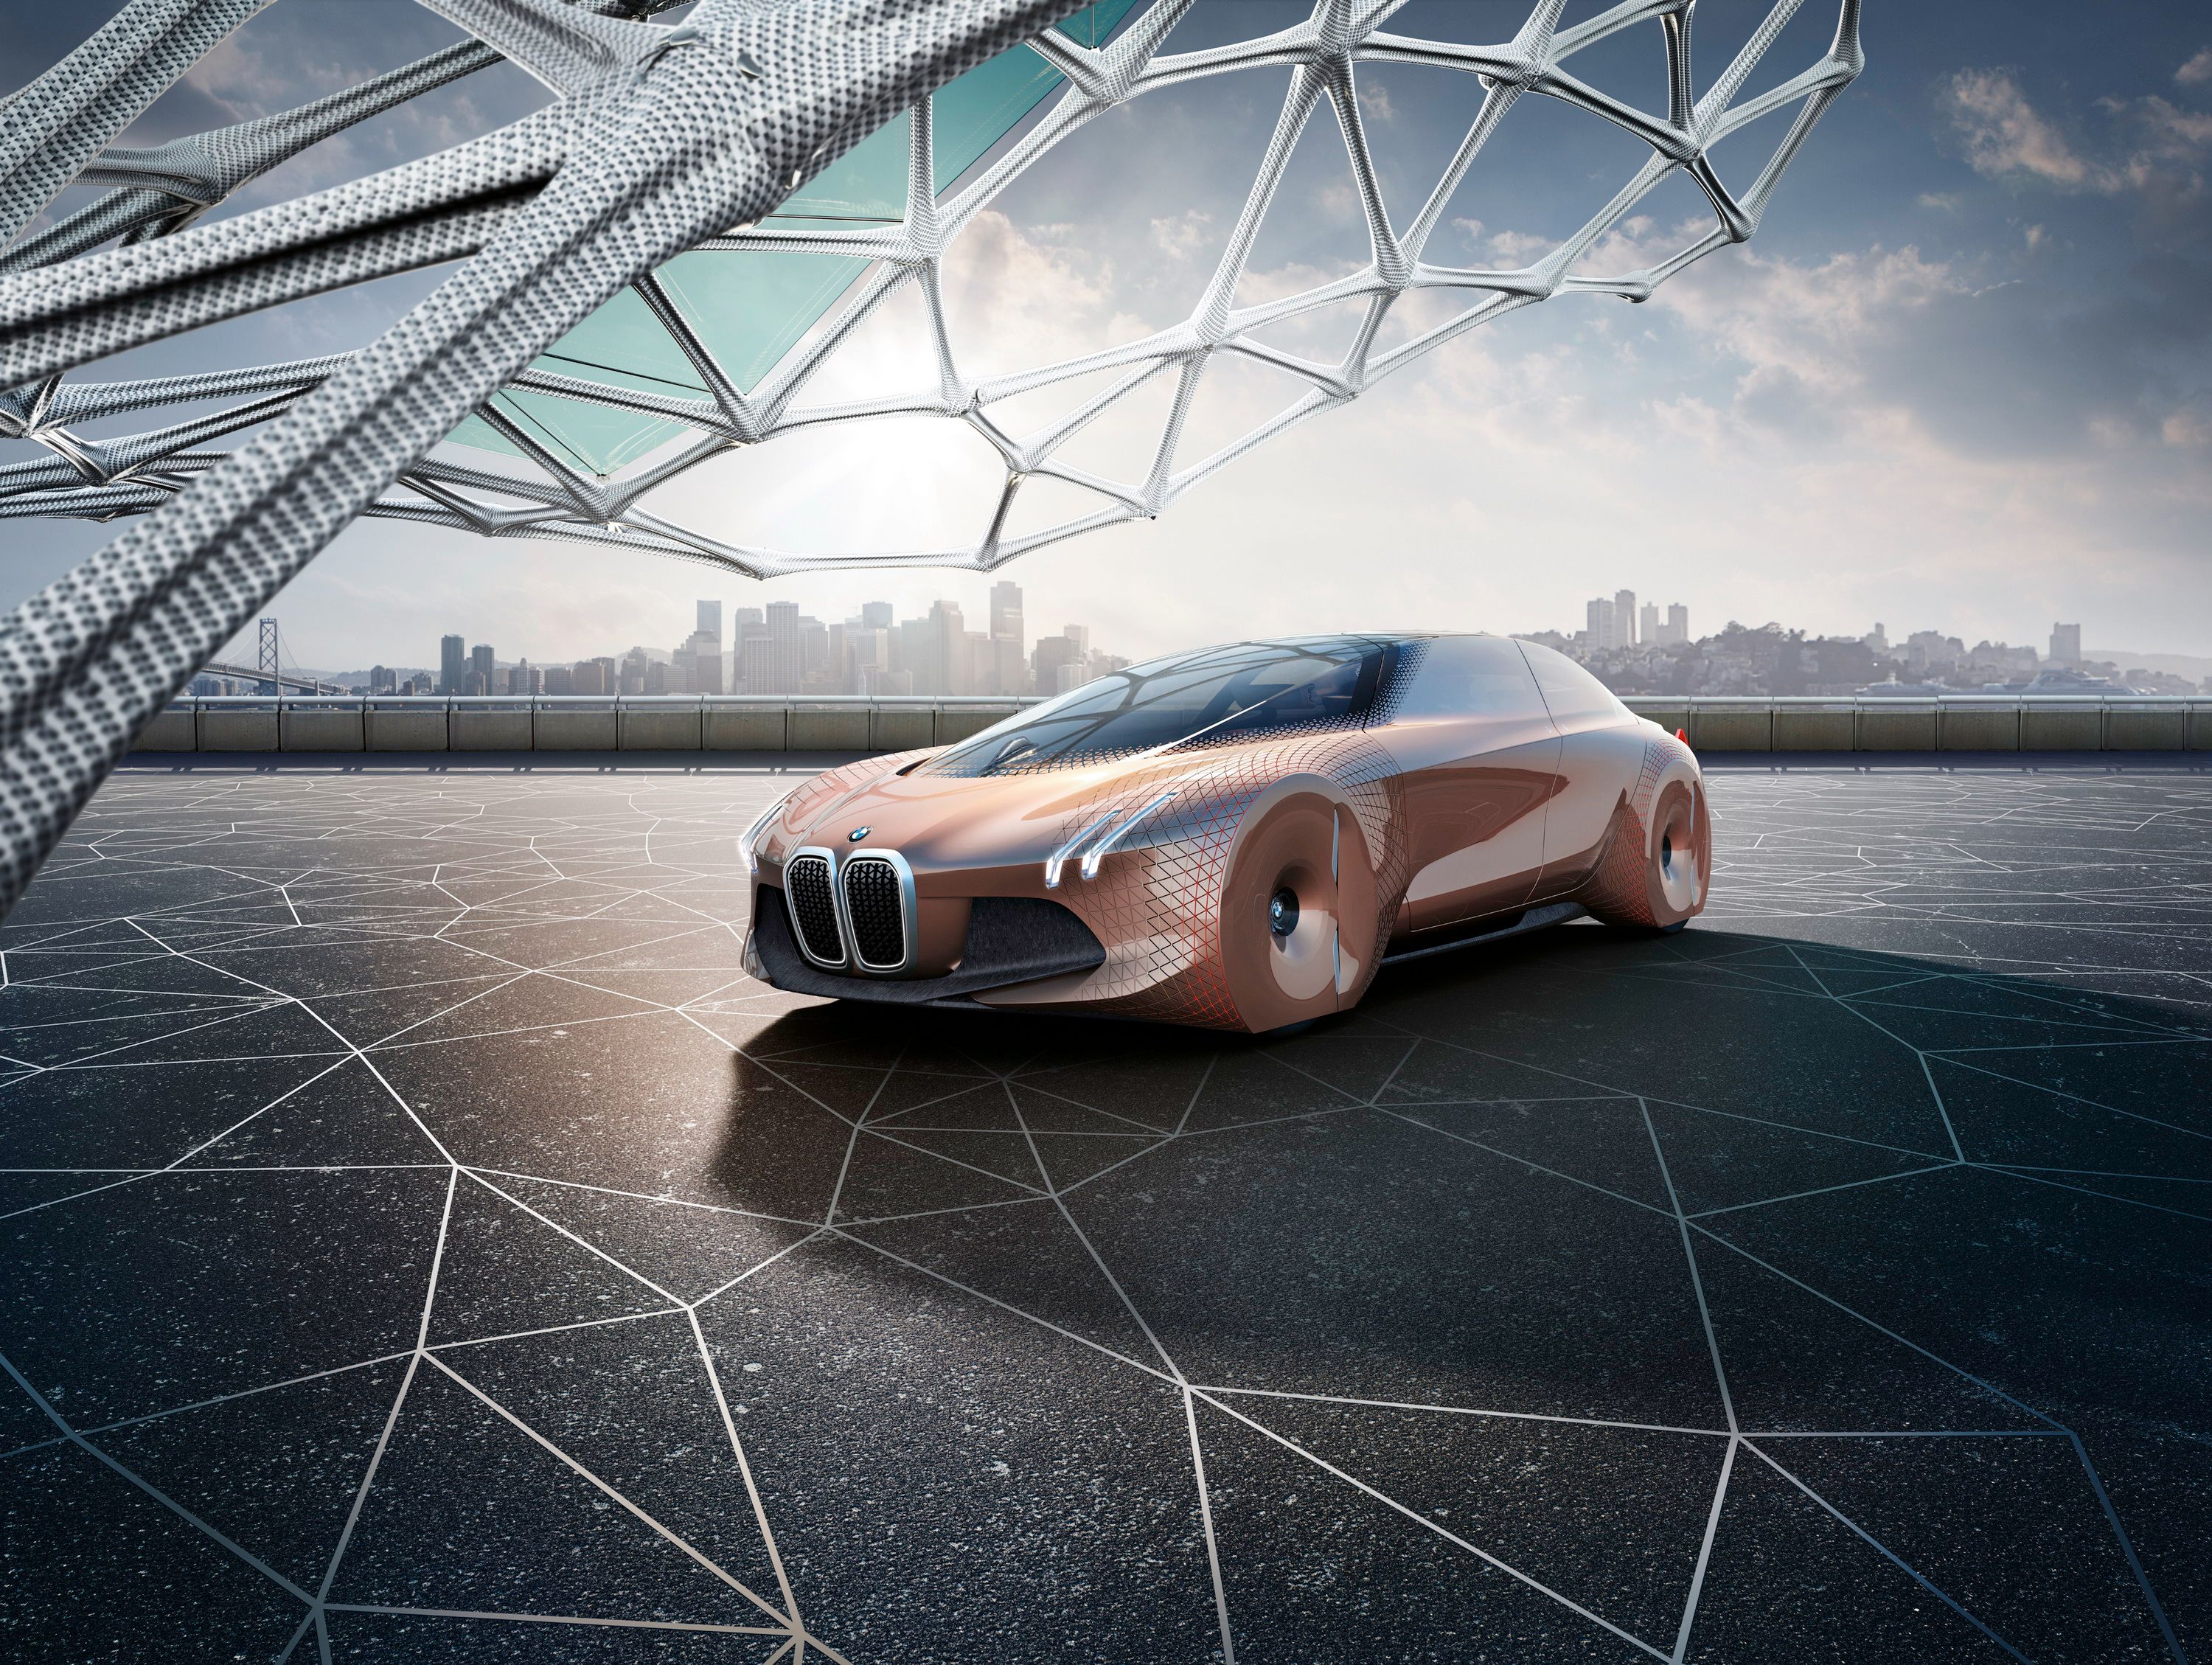 2019 Supercar Blondie Shows Us Just How Crazy the BMW Vision Next 100 Really Is